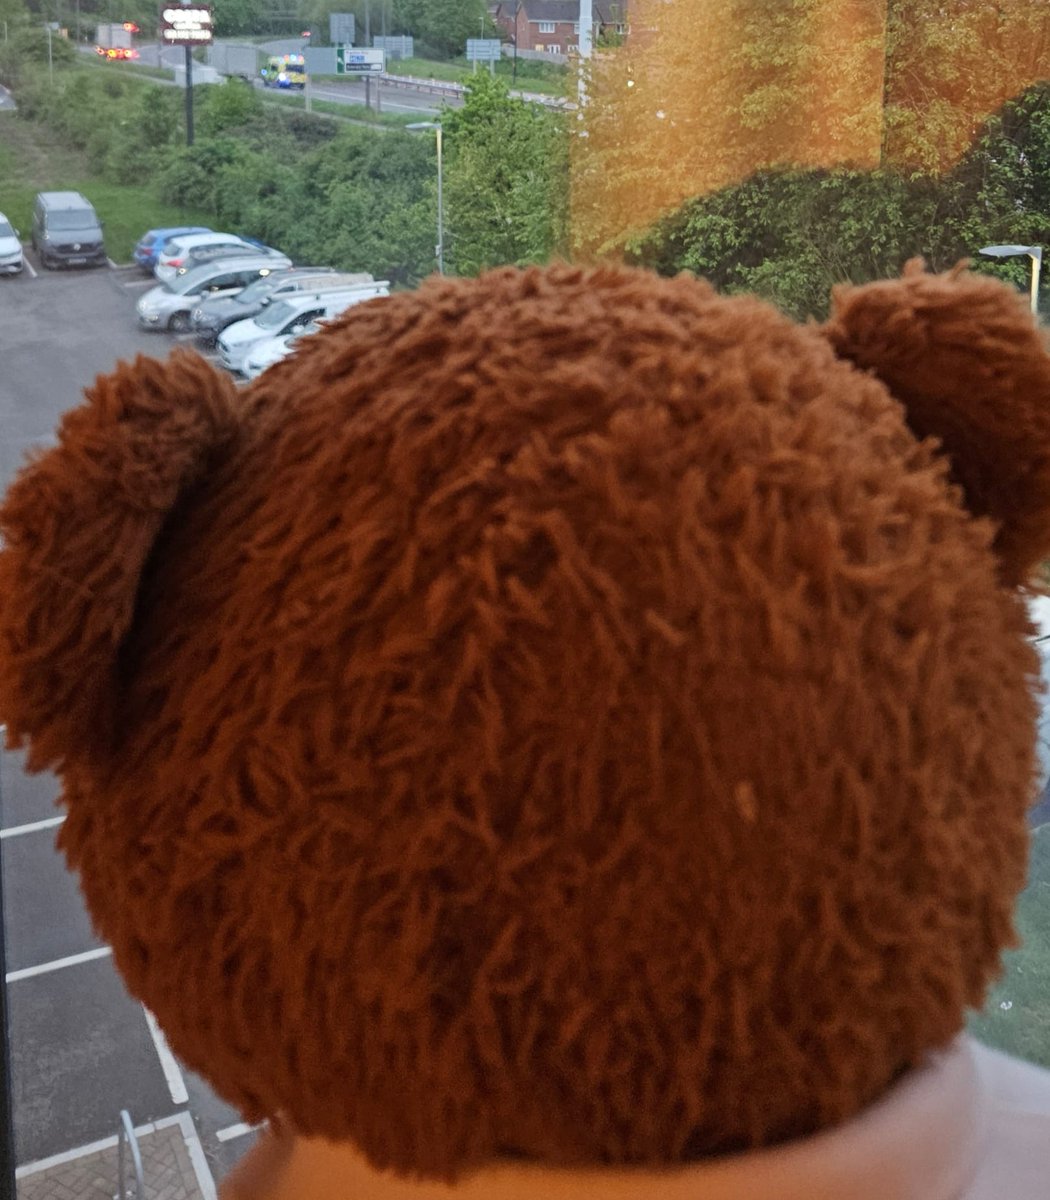 So last night in my #hotel room I heard a LOT of sirens (is that normal in Bristol?!) I only managed to get pics of 2 vehicles but it's always fun to spot emergency services out & about! #bearswithjobs #ontheroad #teachingyoutosavelives #team999 #emergencyservices #999family